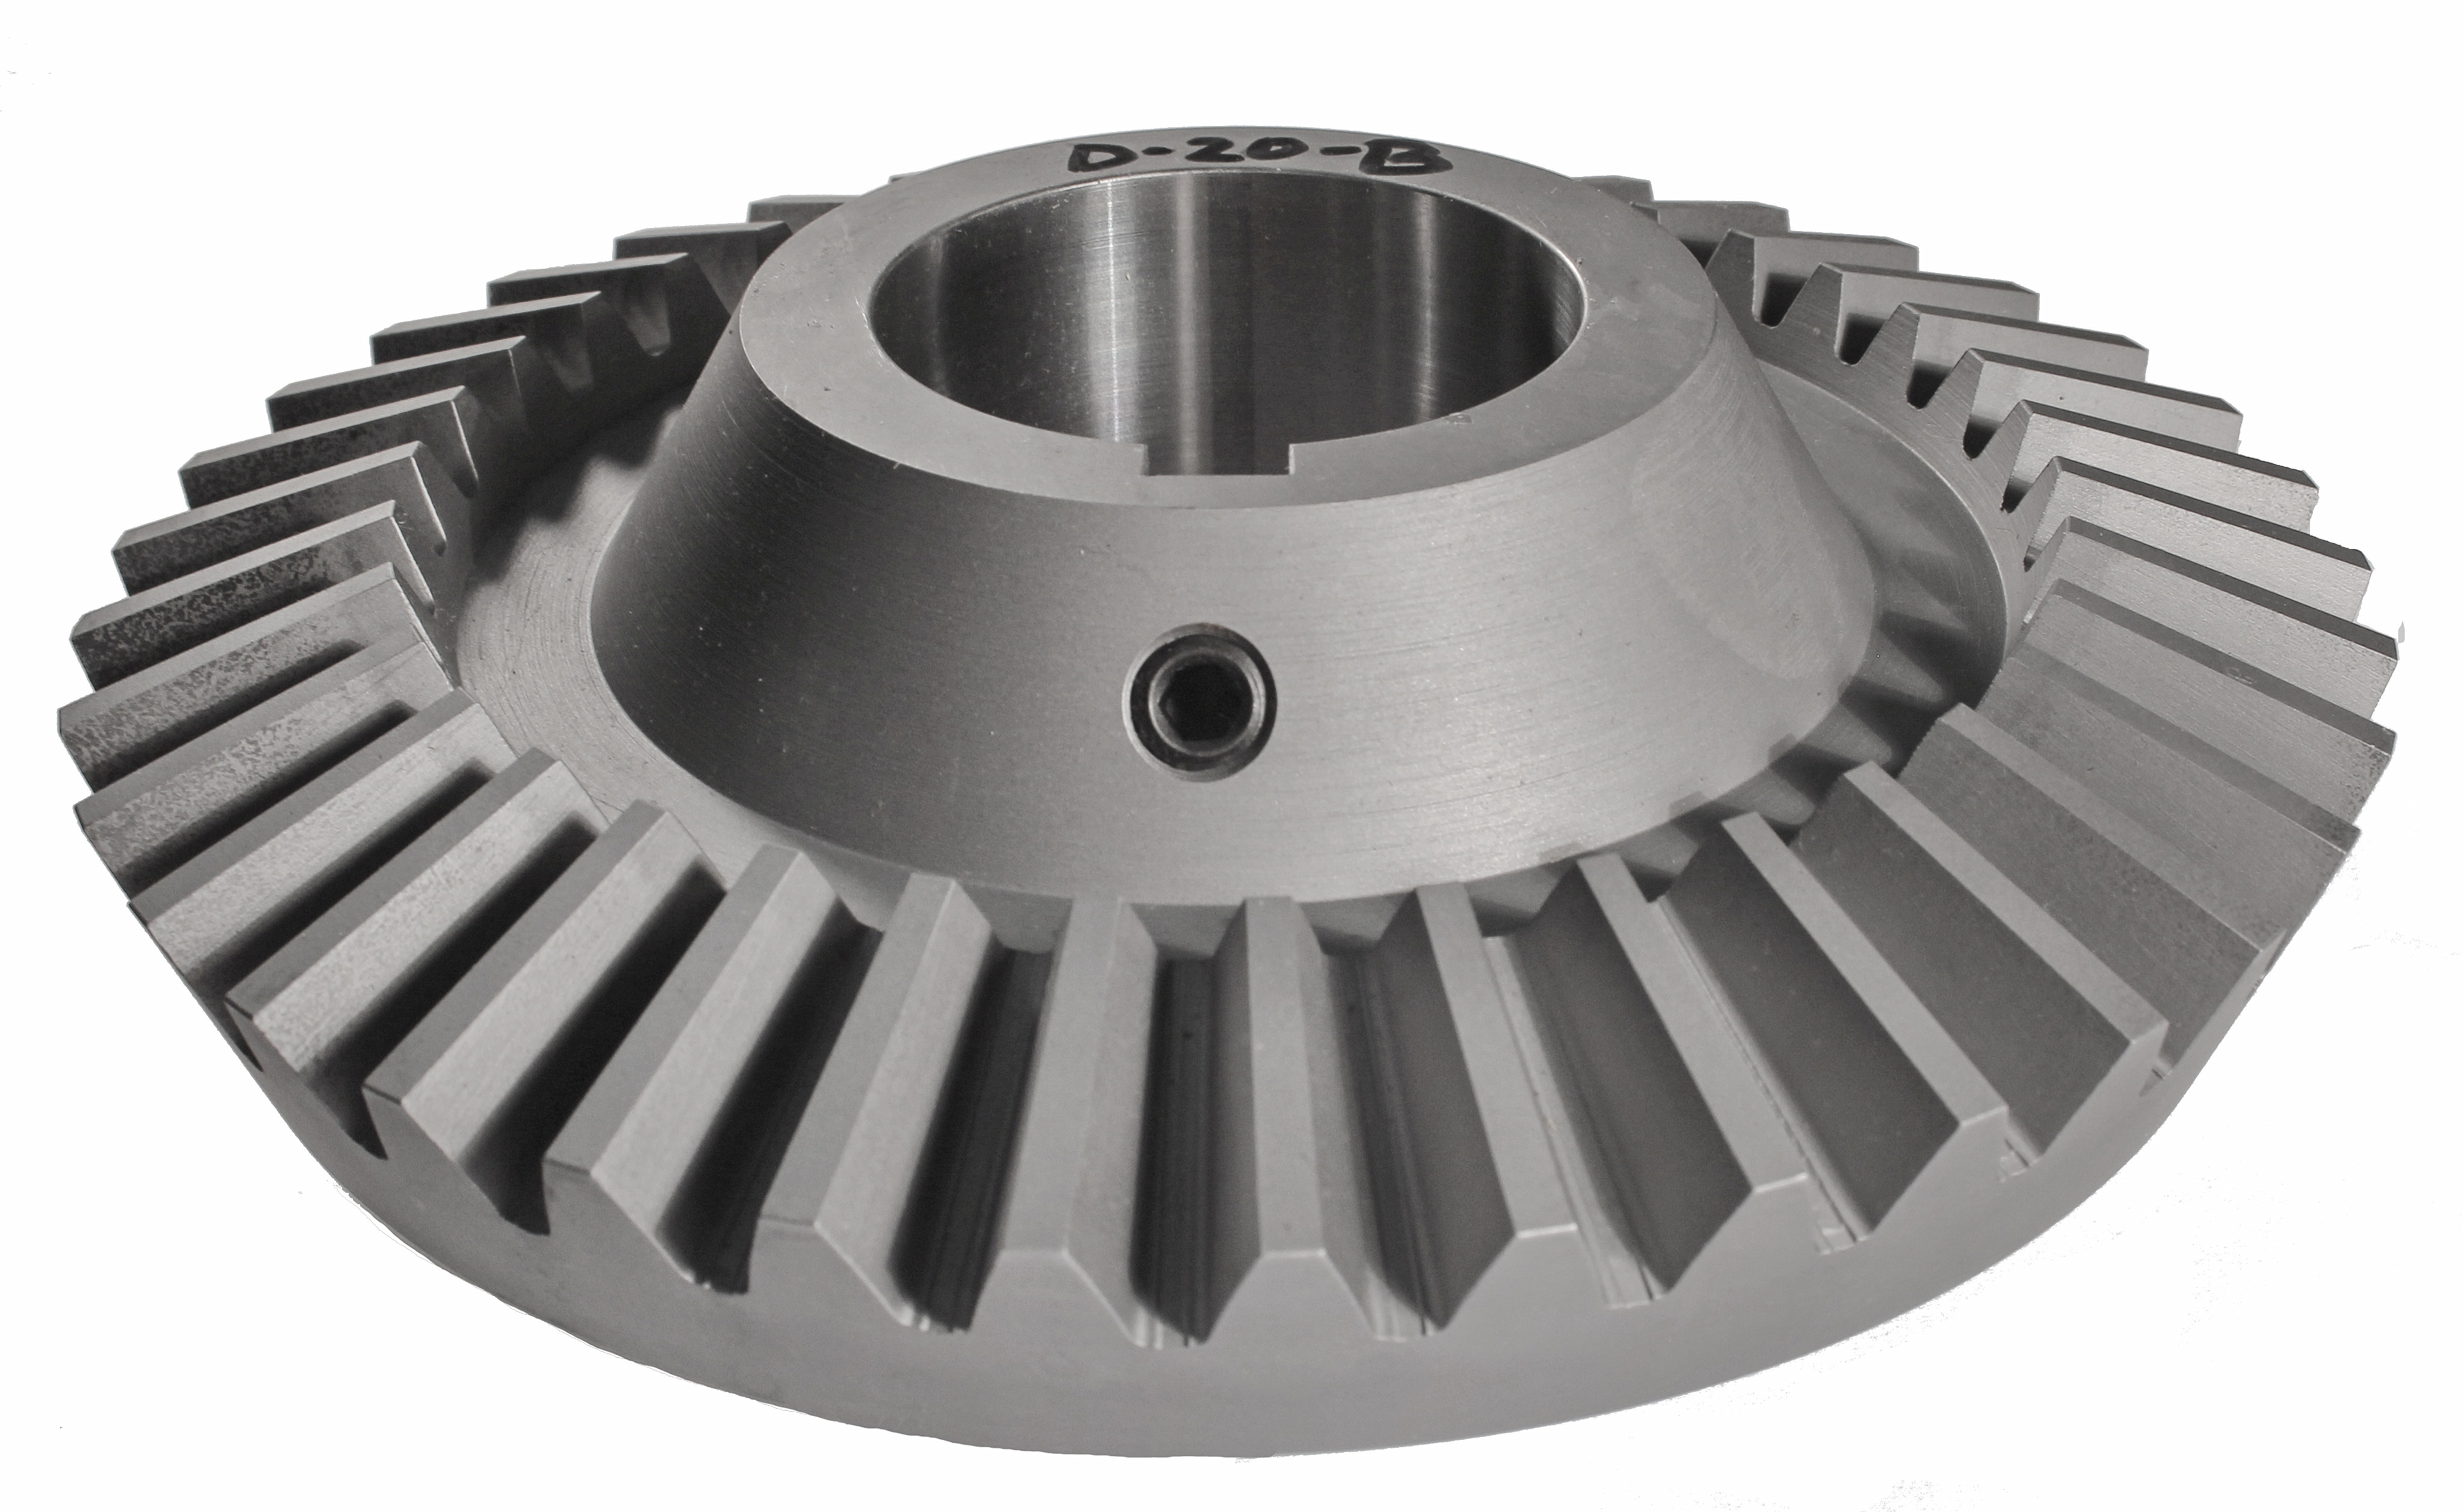 Fabricated parts or component for heavy industrial process equipment